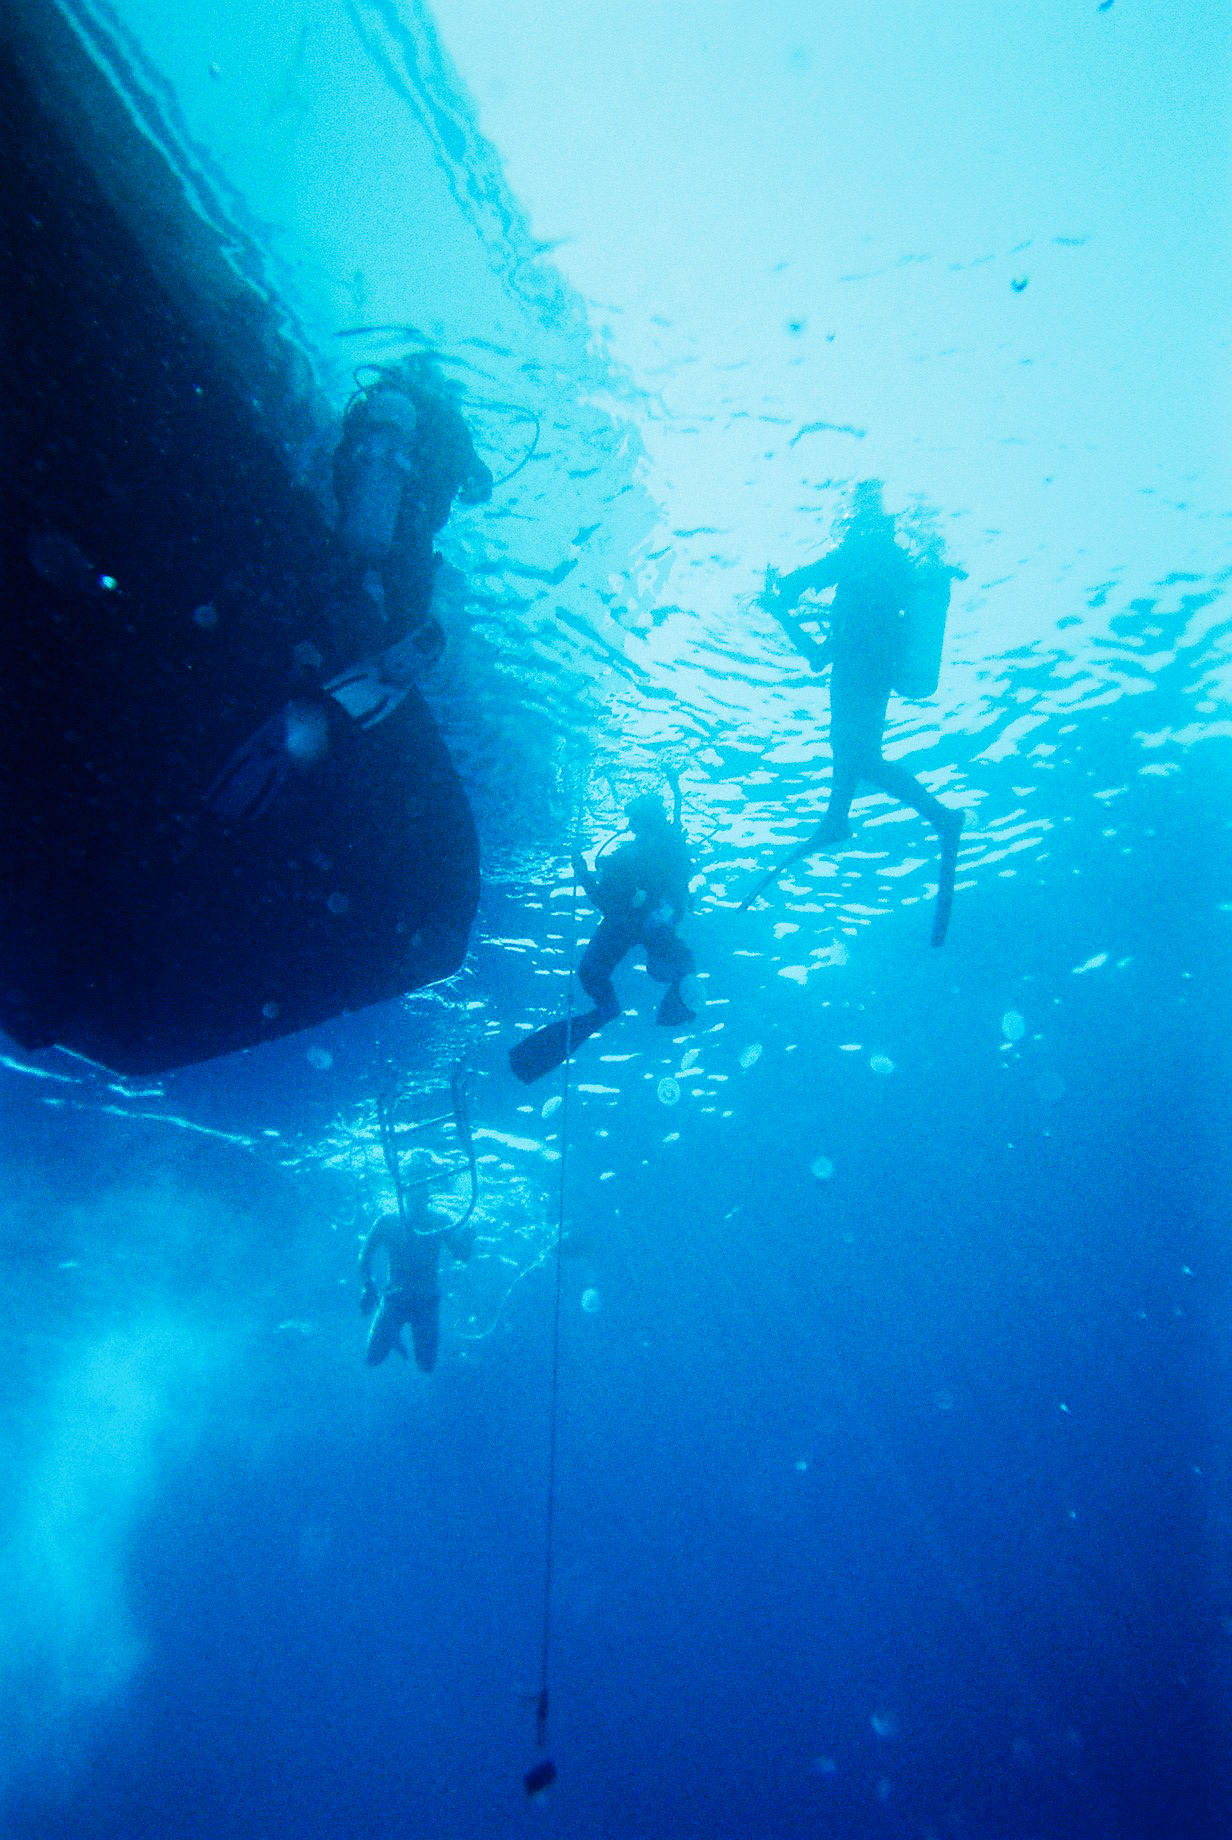 Underwater photo taken from the bottom to the surface of the water, with a boat hull and 4 divers